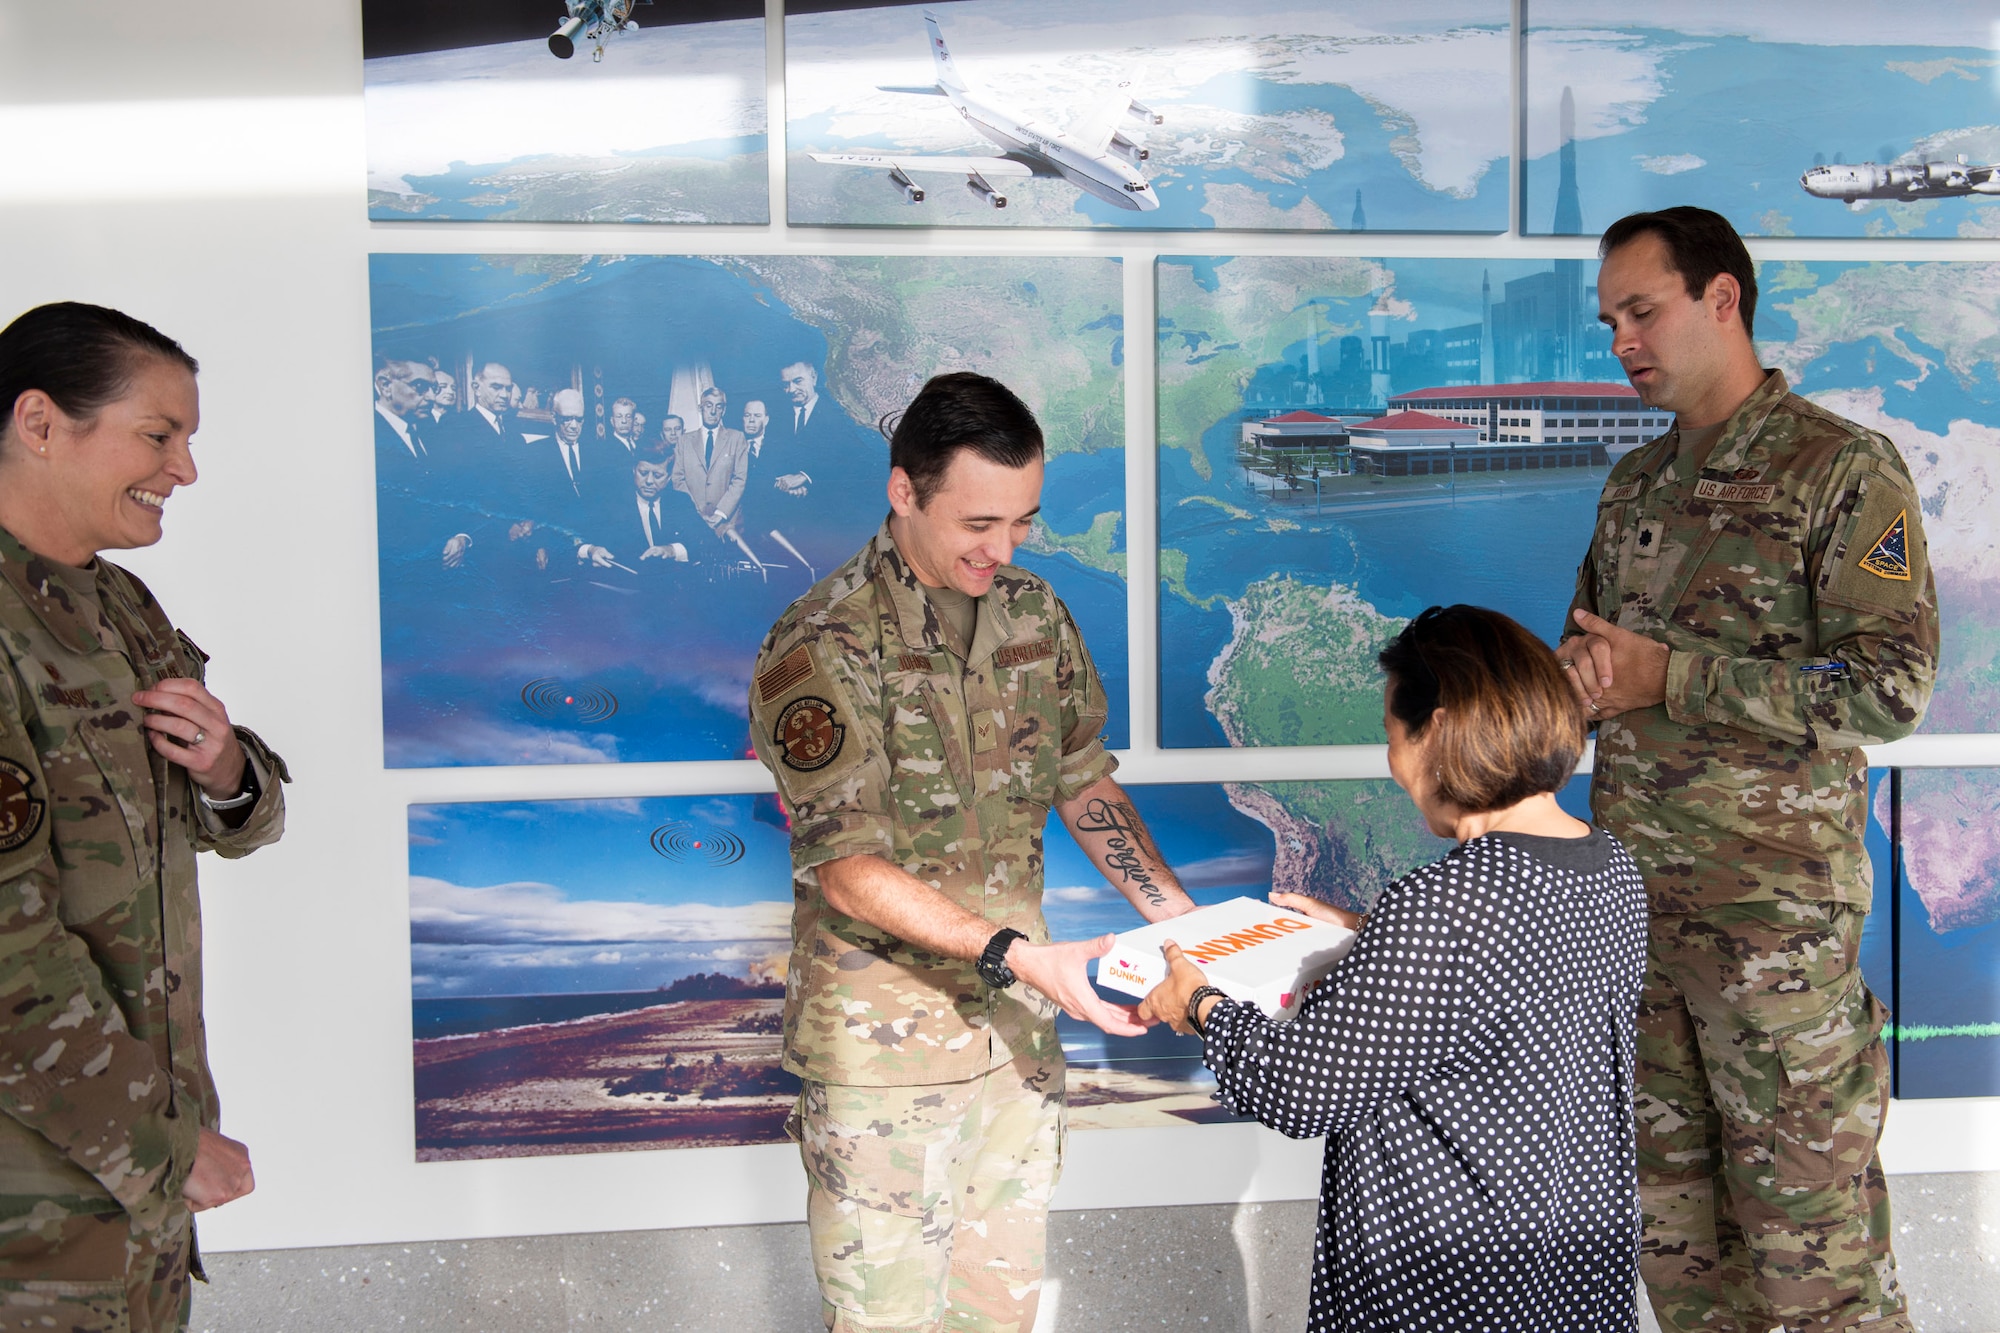 Jade Black, chief of Community Services for the 45th Force Support Squadron, presents a box of donuts to Senior Airman Tyler Johnson, a subsurface operations manager at the 22nd Surveillance Squadron, Patrick SFB, Fla., as a small token of her gratitude after Johnson received a coin from Lt. Col. Brett Kuhrt, 45th FSS commander.  Tyler was lauded for rendering aid to a woman and her child who were involved in an auto accident near the base April 13, 2023.  Also pictured is Lt. Col. Christine Lukasik (left), 22nd SURS commander.  (U.S. Air Force photo by Matthew S. Jurgens)